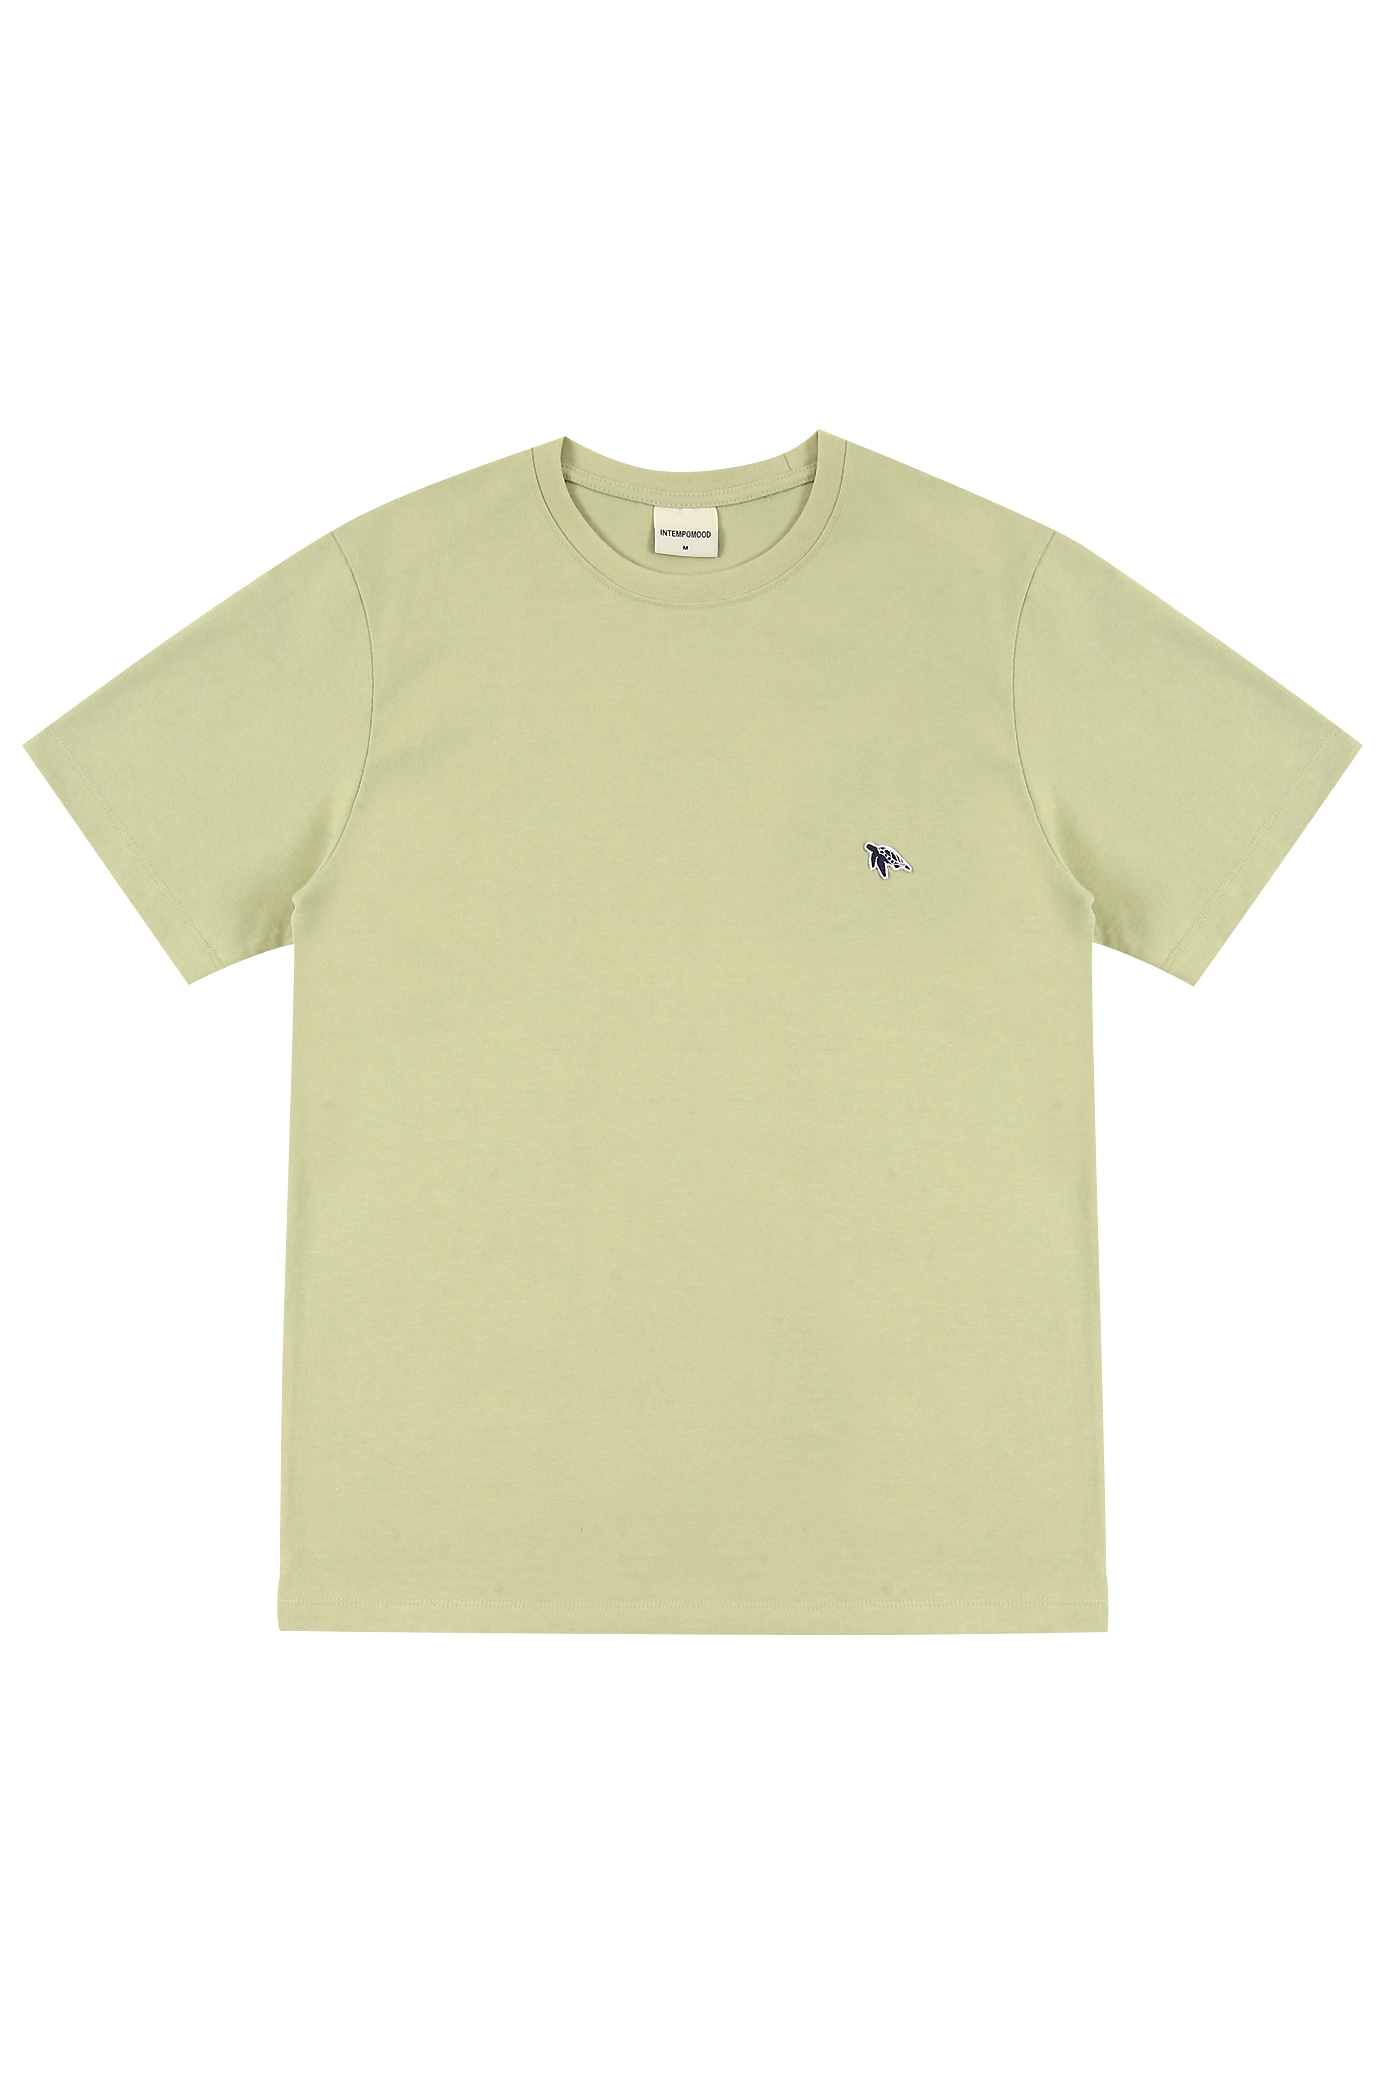 Turtle Patches T-shirt_Sage green